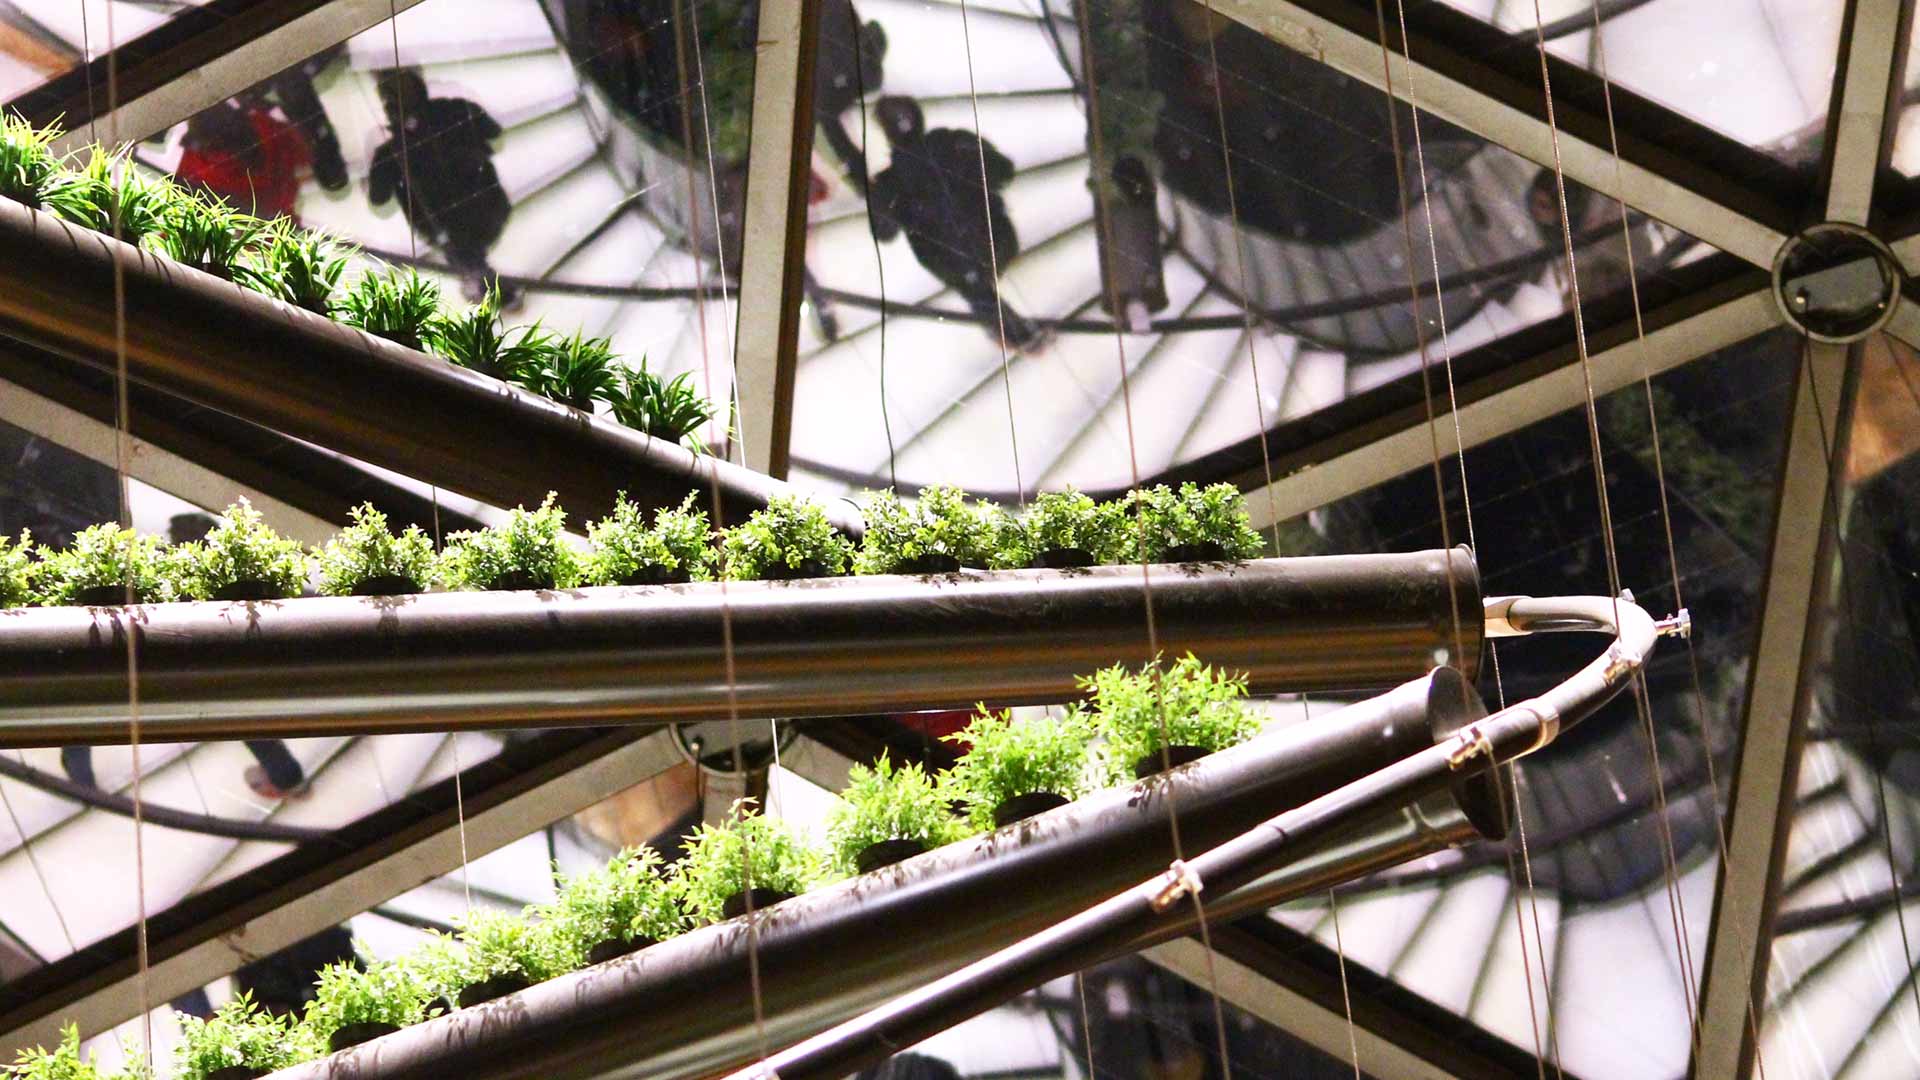 Building and plants on escalator